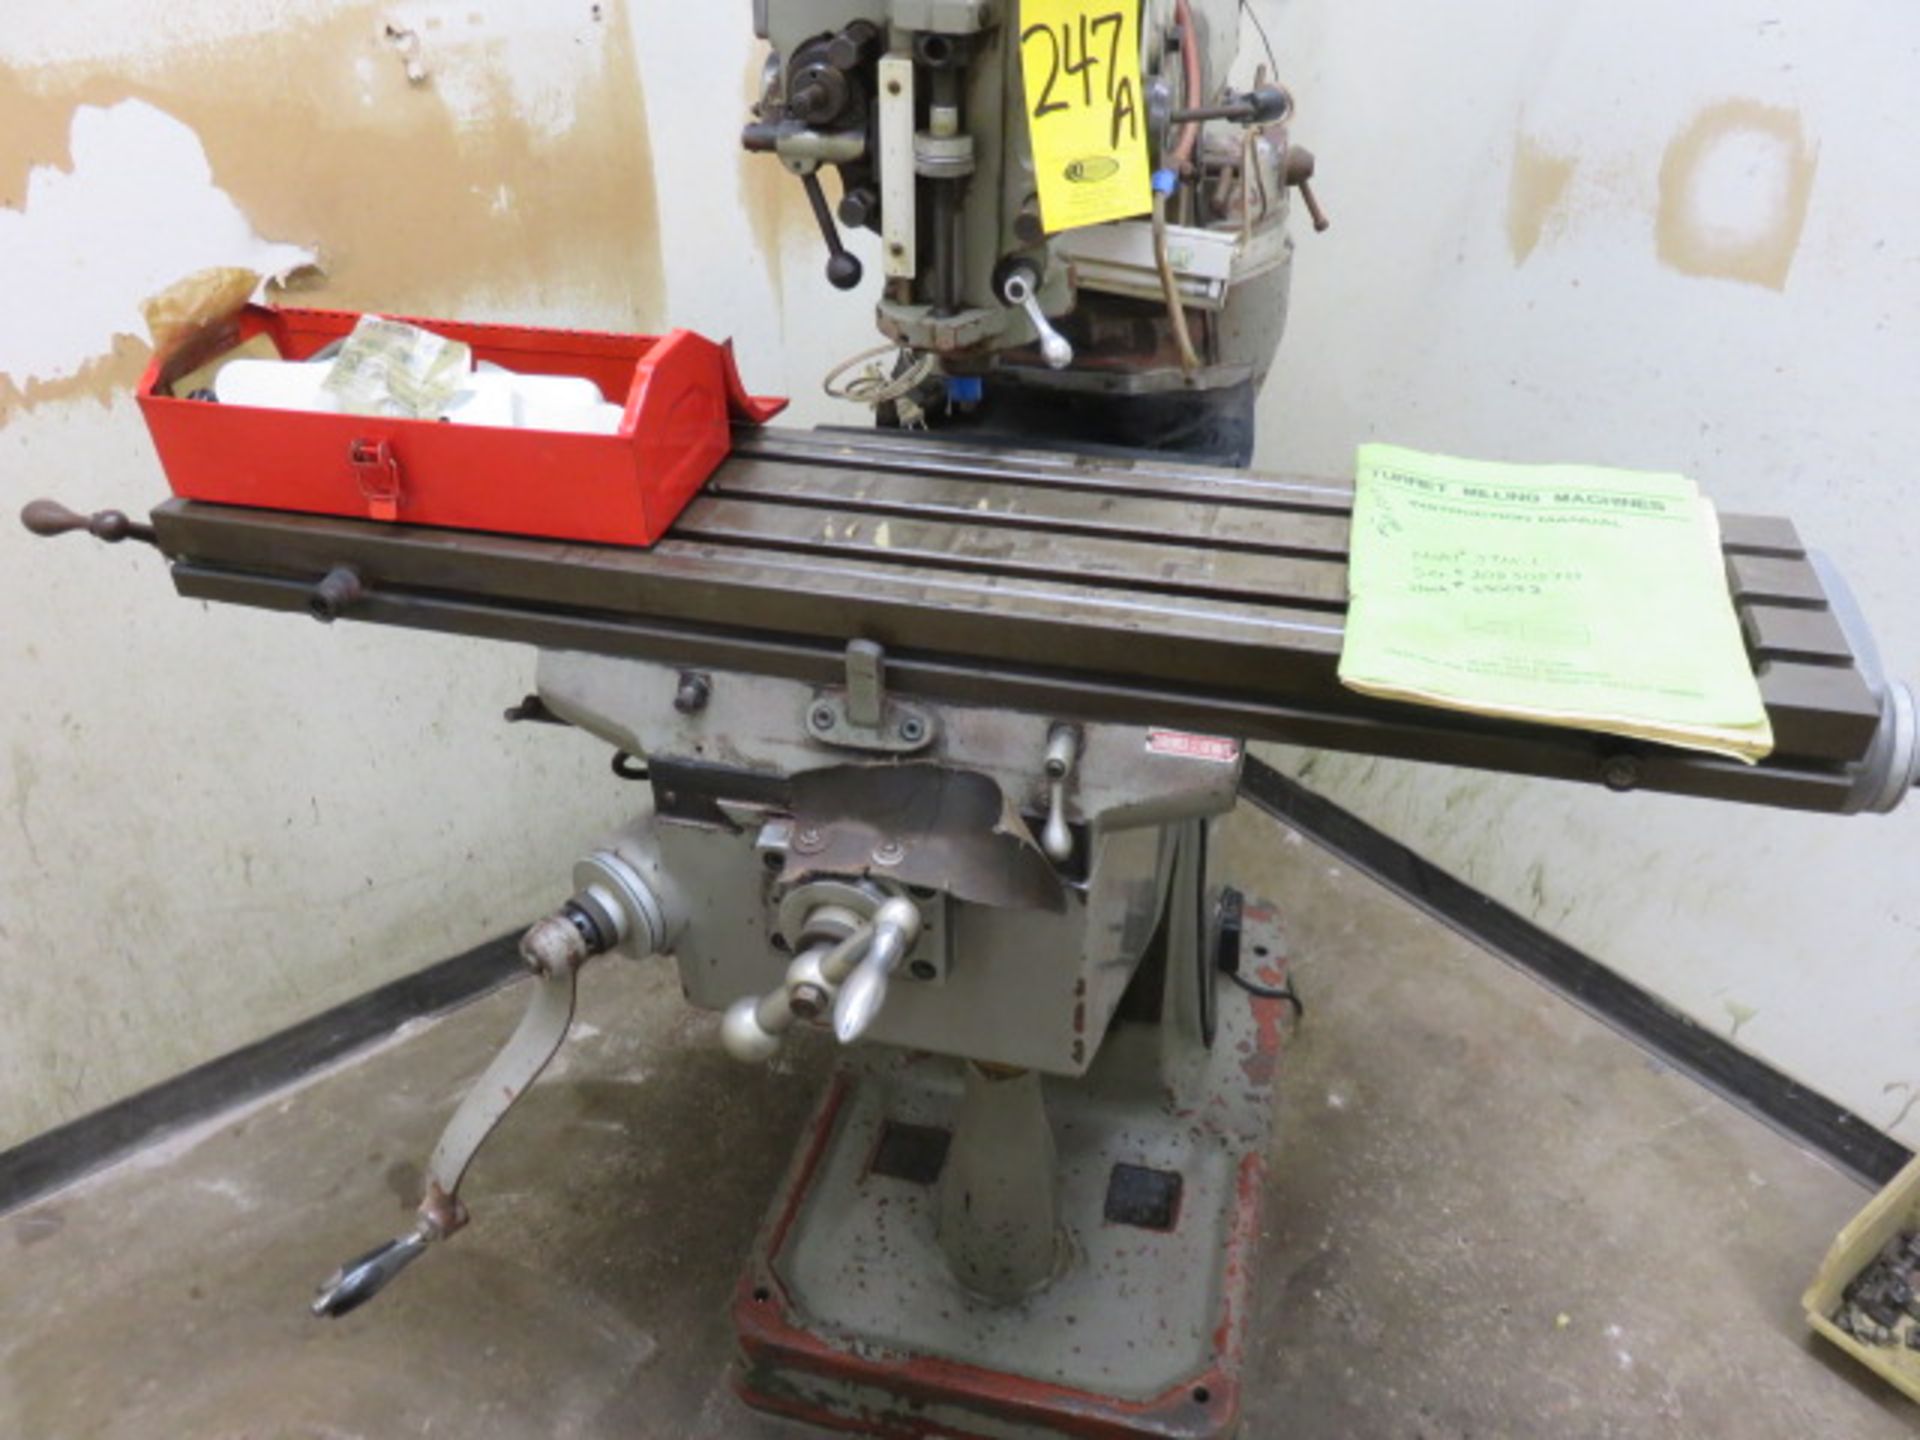 JET JTM-1 TURRET MILLING MACHINE, S/N 206 505711, NO. 690082, 9 IN. X 42 IN. TABLE, 2 HP - Image 3 of 3